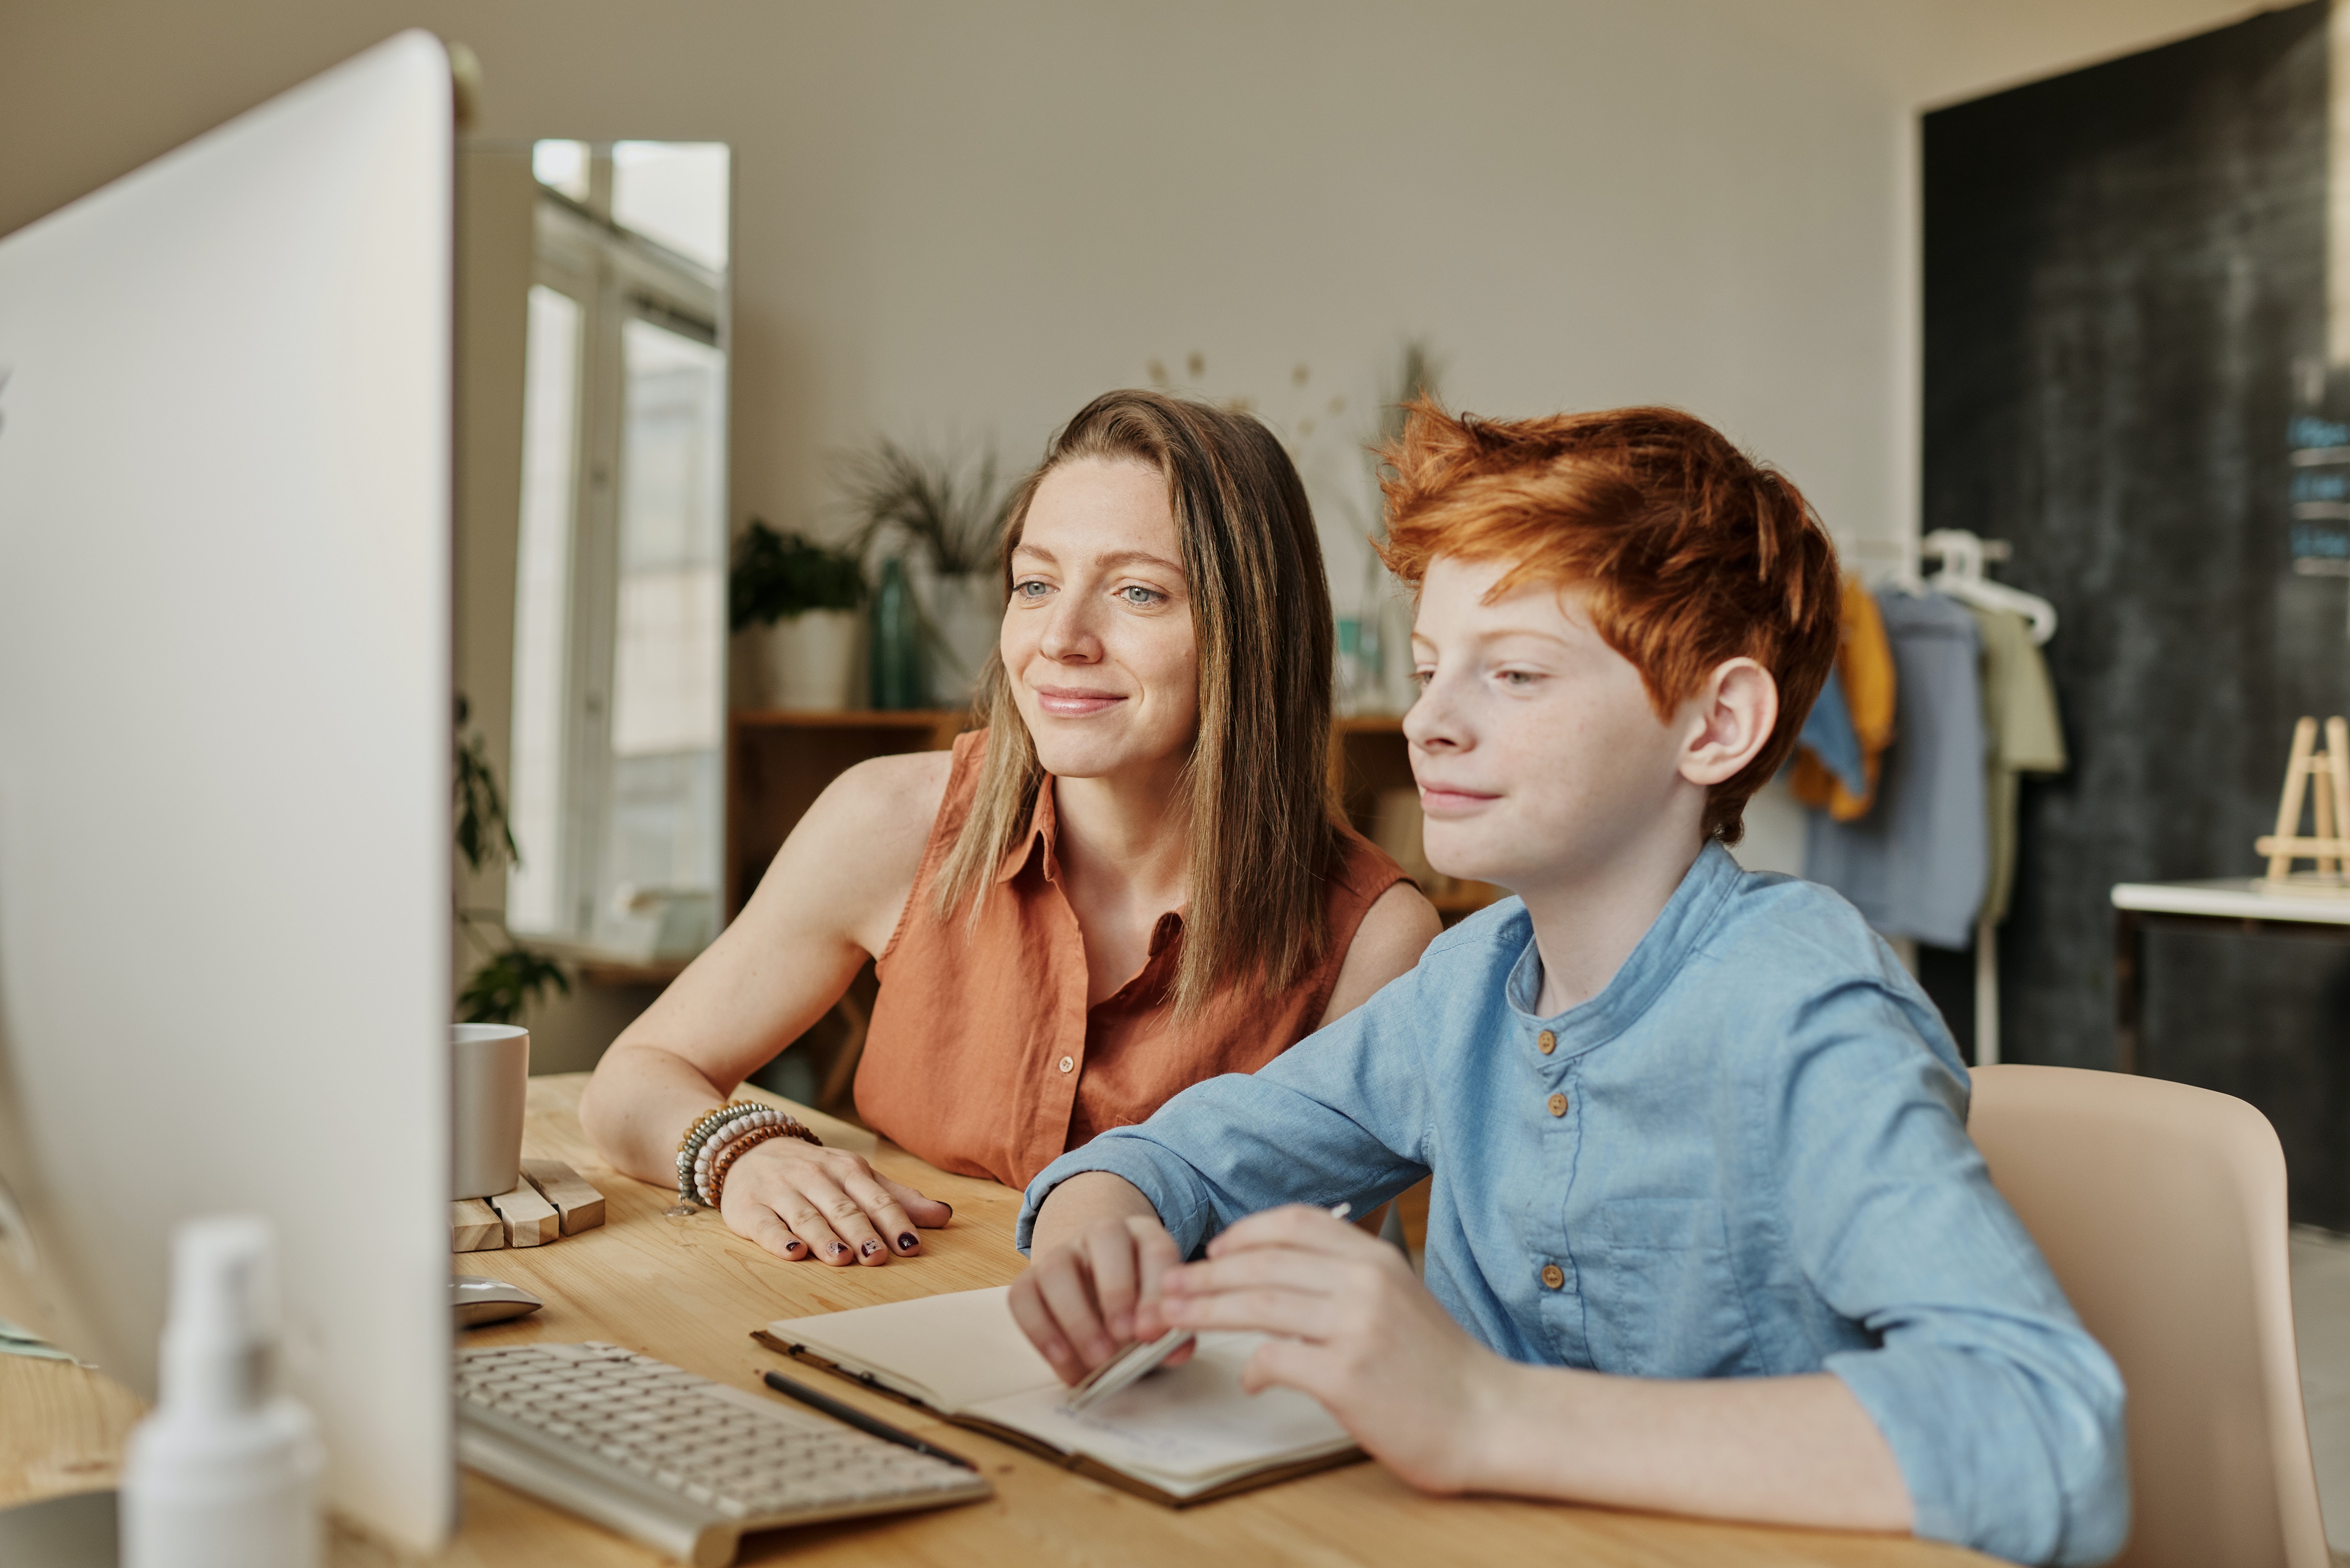 photo-of-woman-and-boy-smiling-while-watching-through-imac-4145350